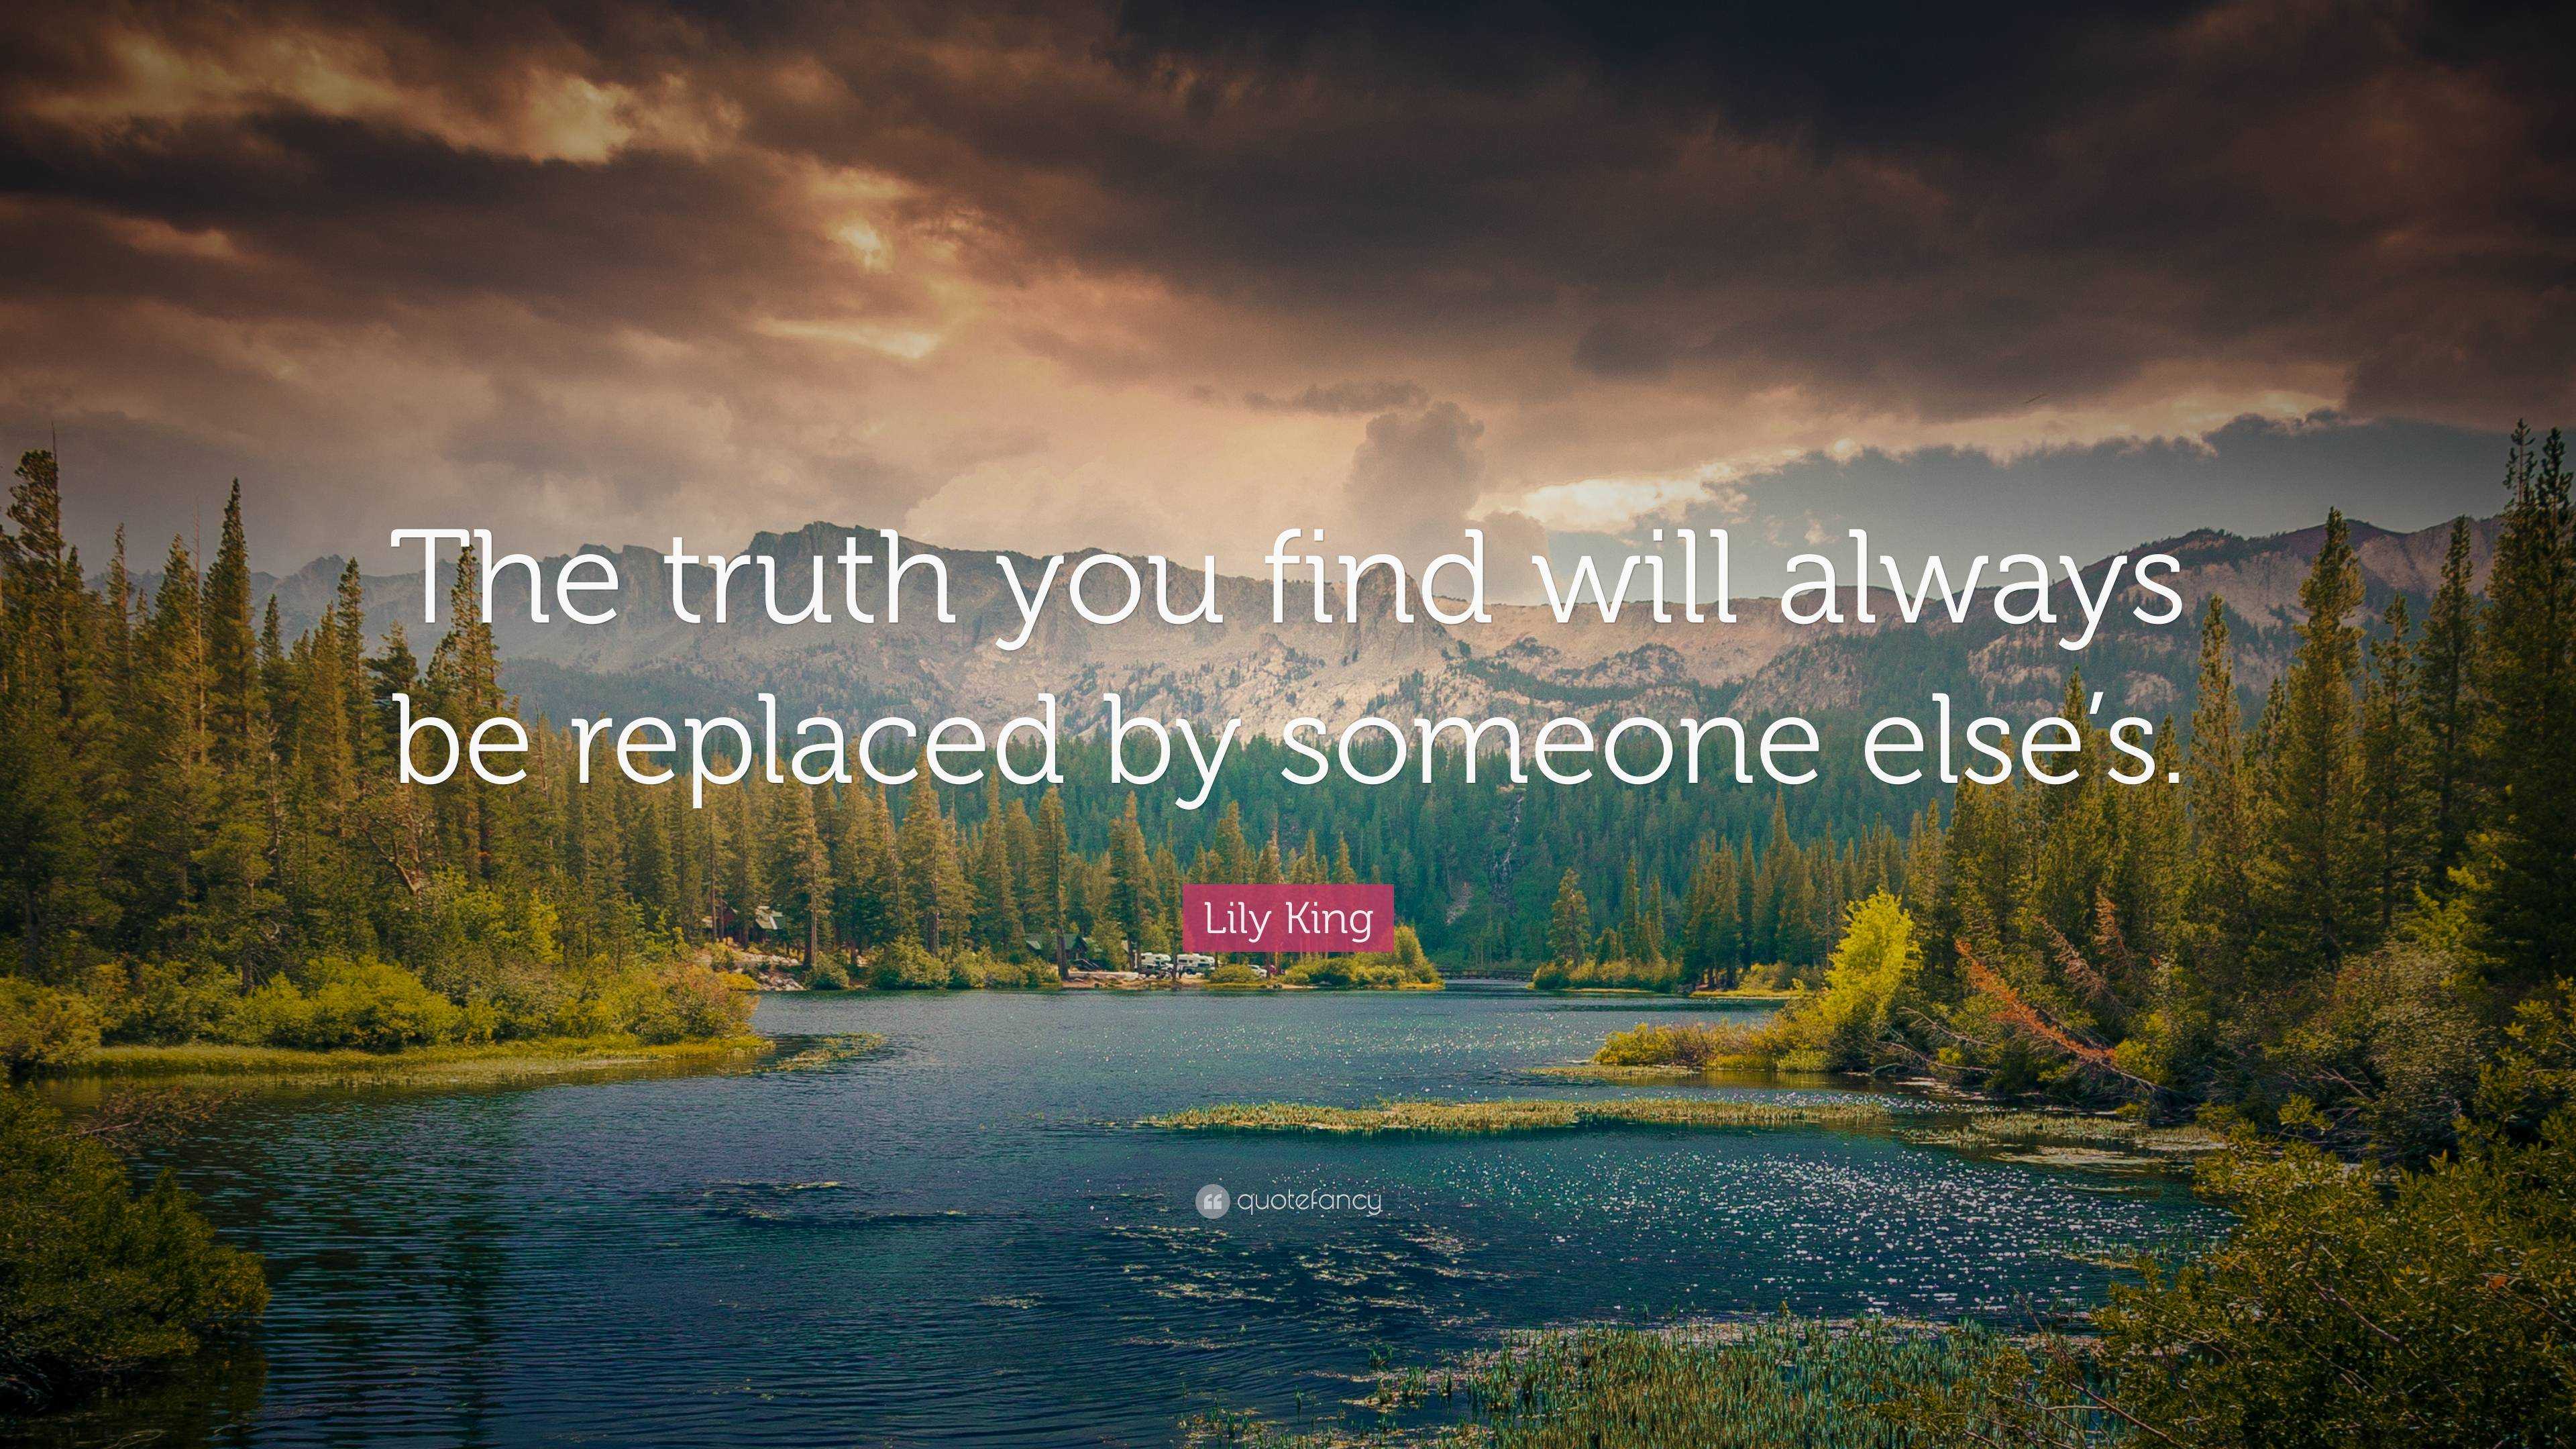 Lily King Quote: “The truth you find will always be replaced by someone ...